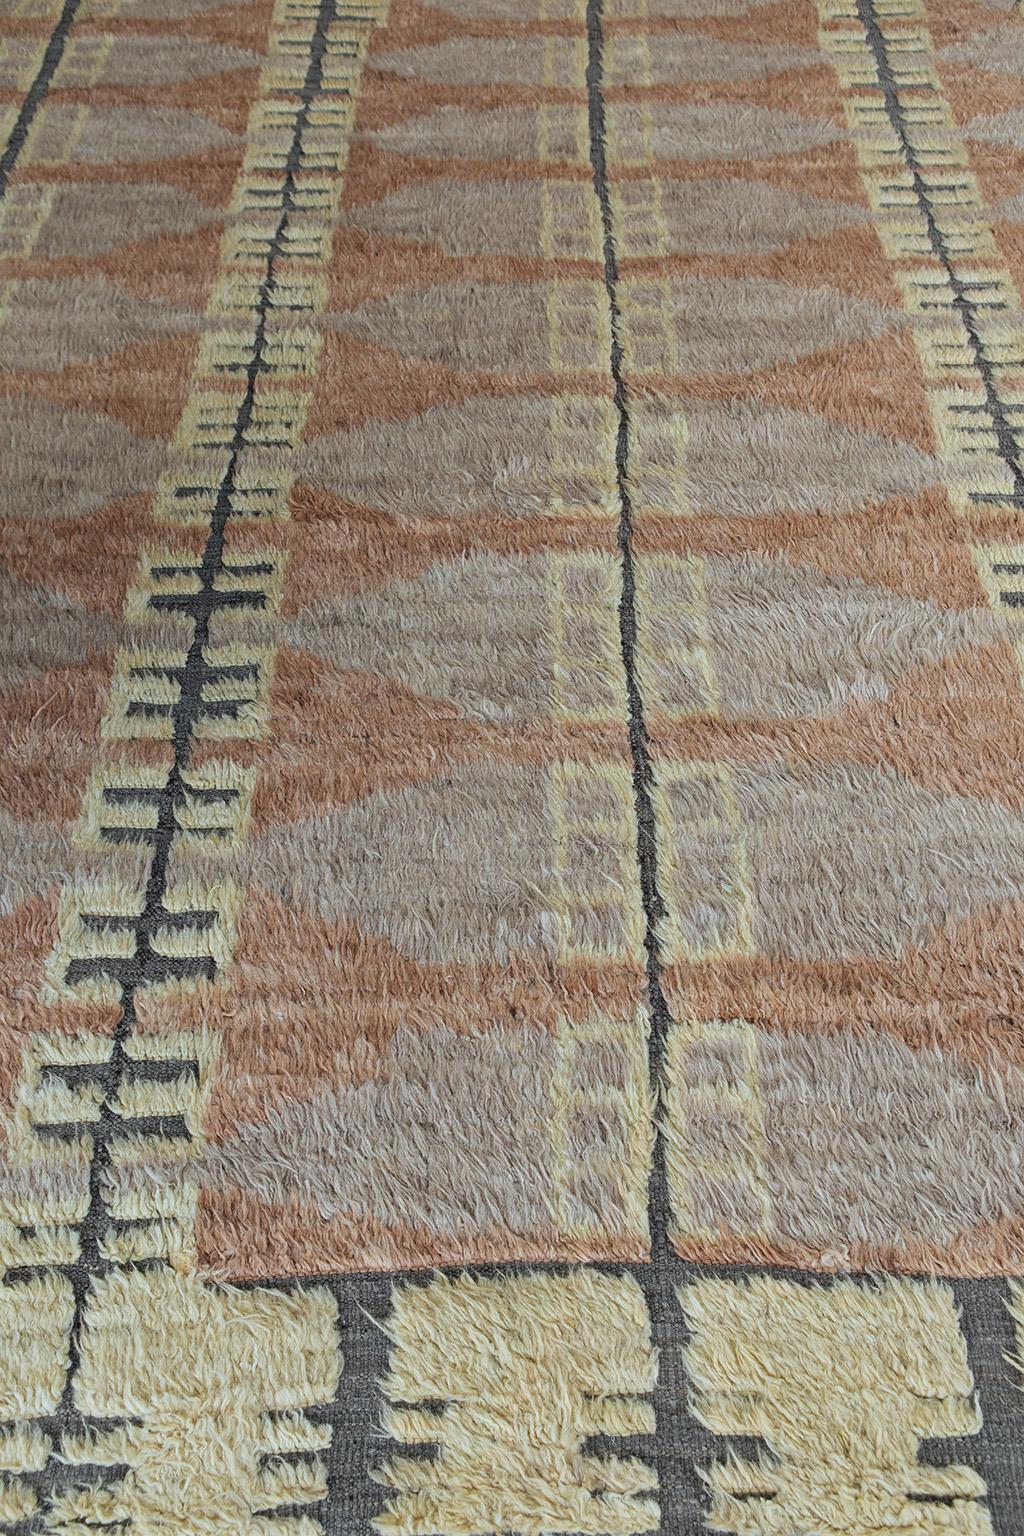 The 'Thus' rug is a handwoven wool piece inspired by vintage Scandinavian design elements and recreated for the modern design world. The repetitive grid creates balance and harmony, handwoven with a neutral flat weave and unique piles of blush,